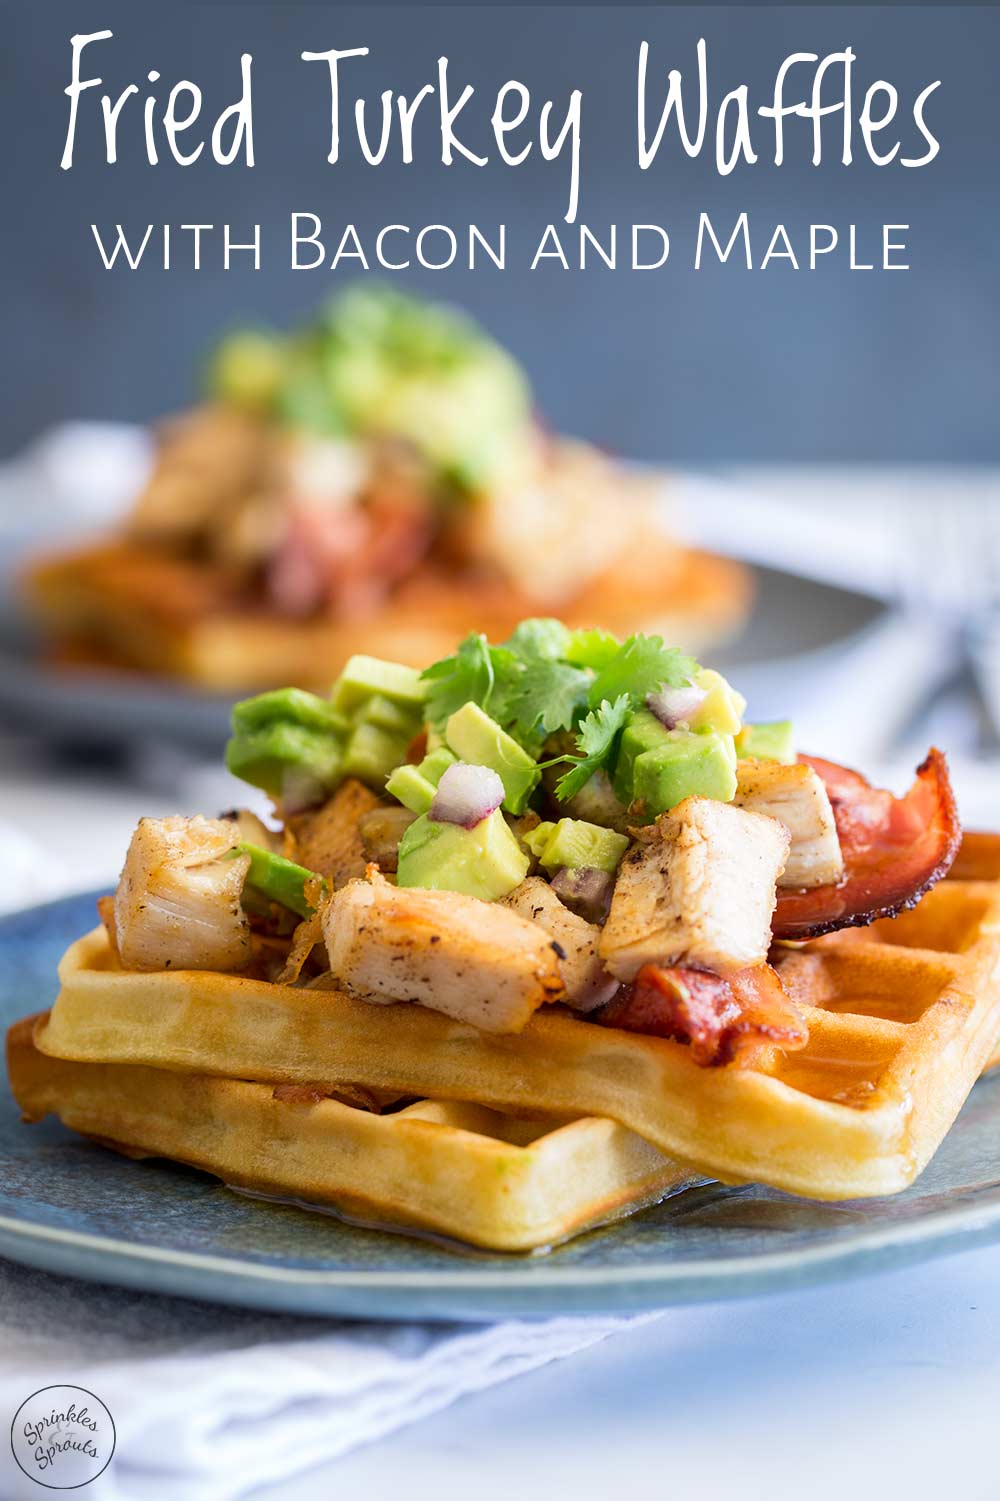 Pin Image: head on view of the turkey waffles with text at the top